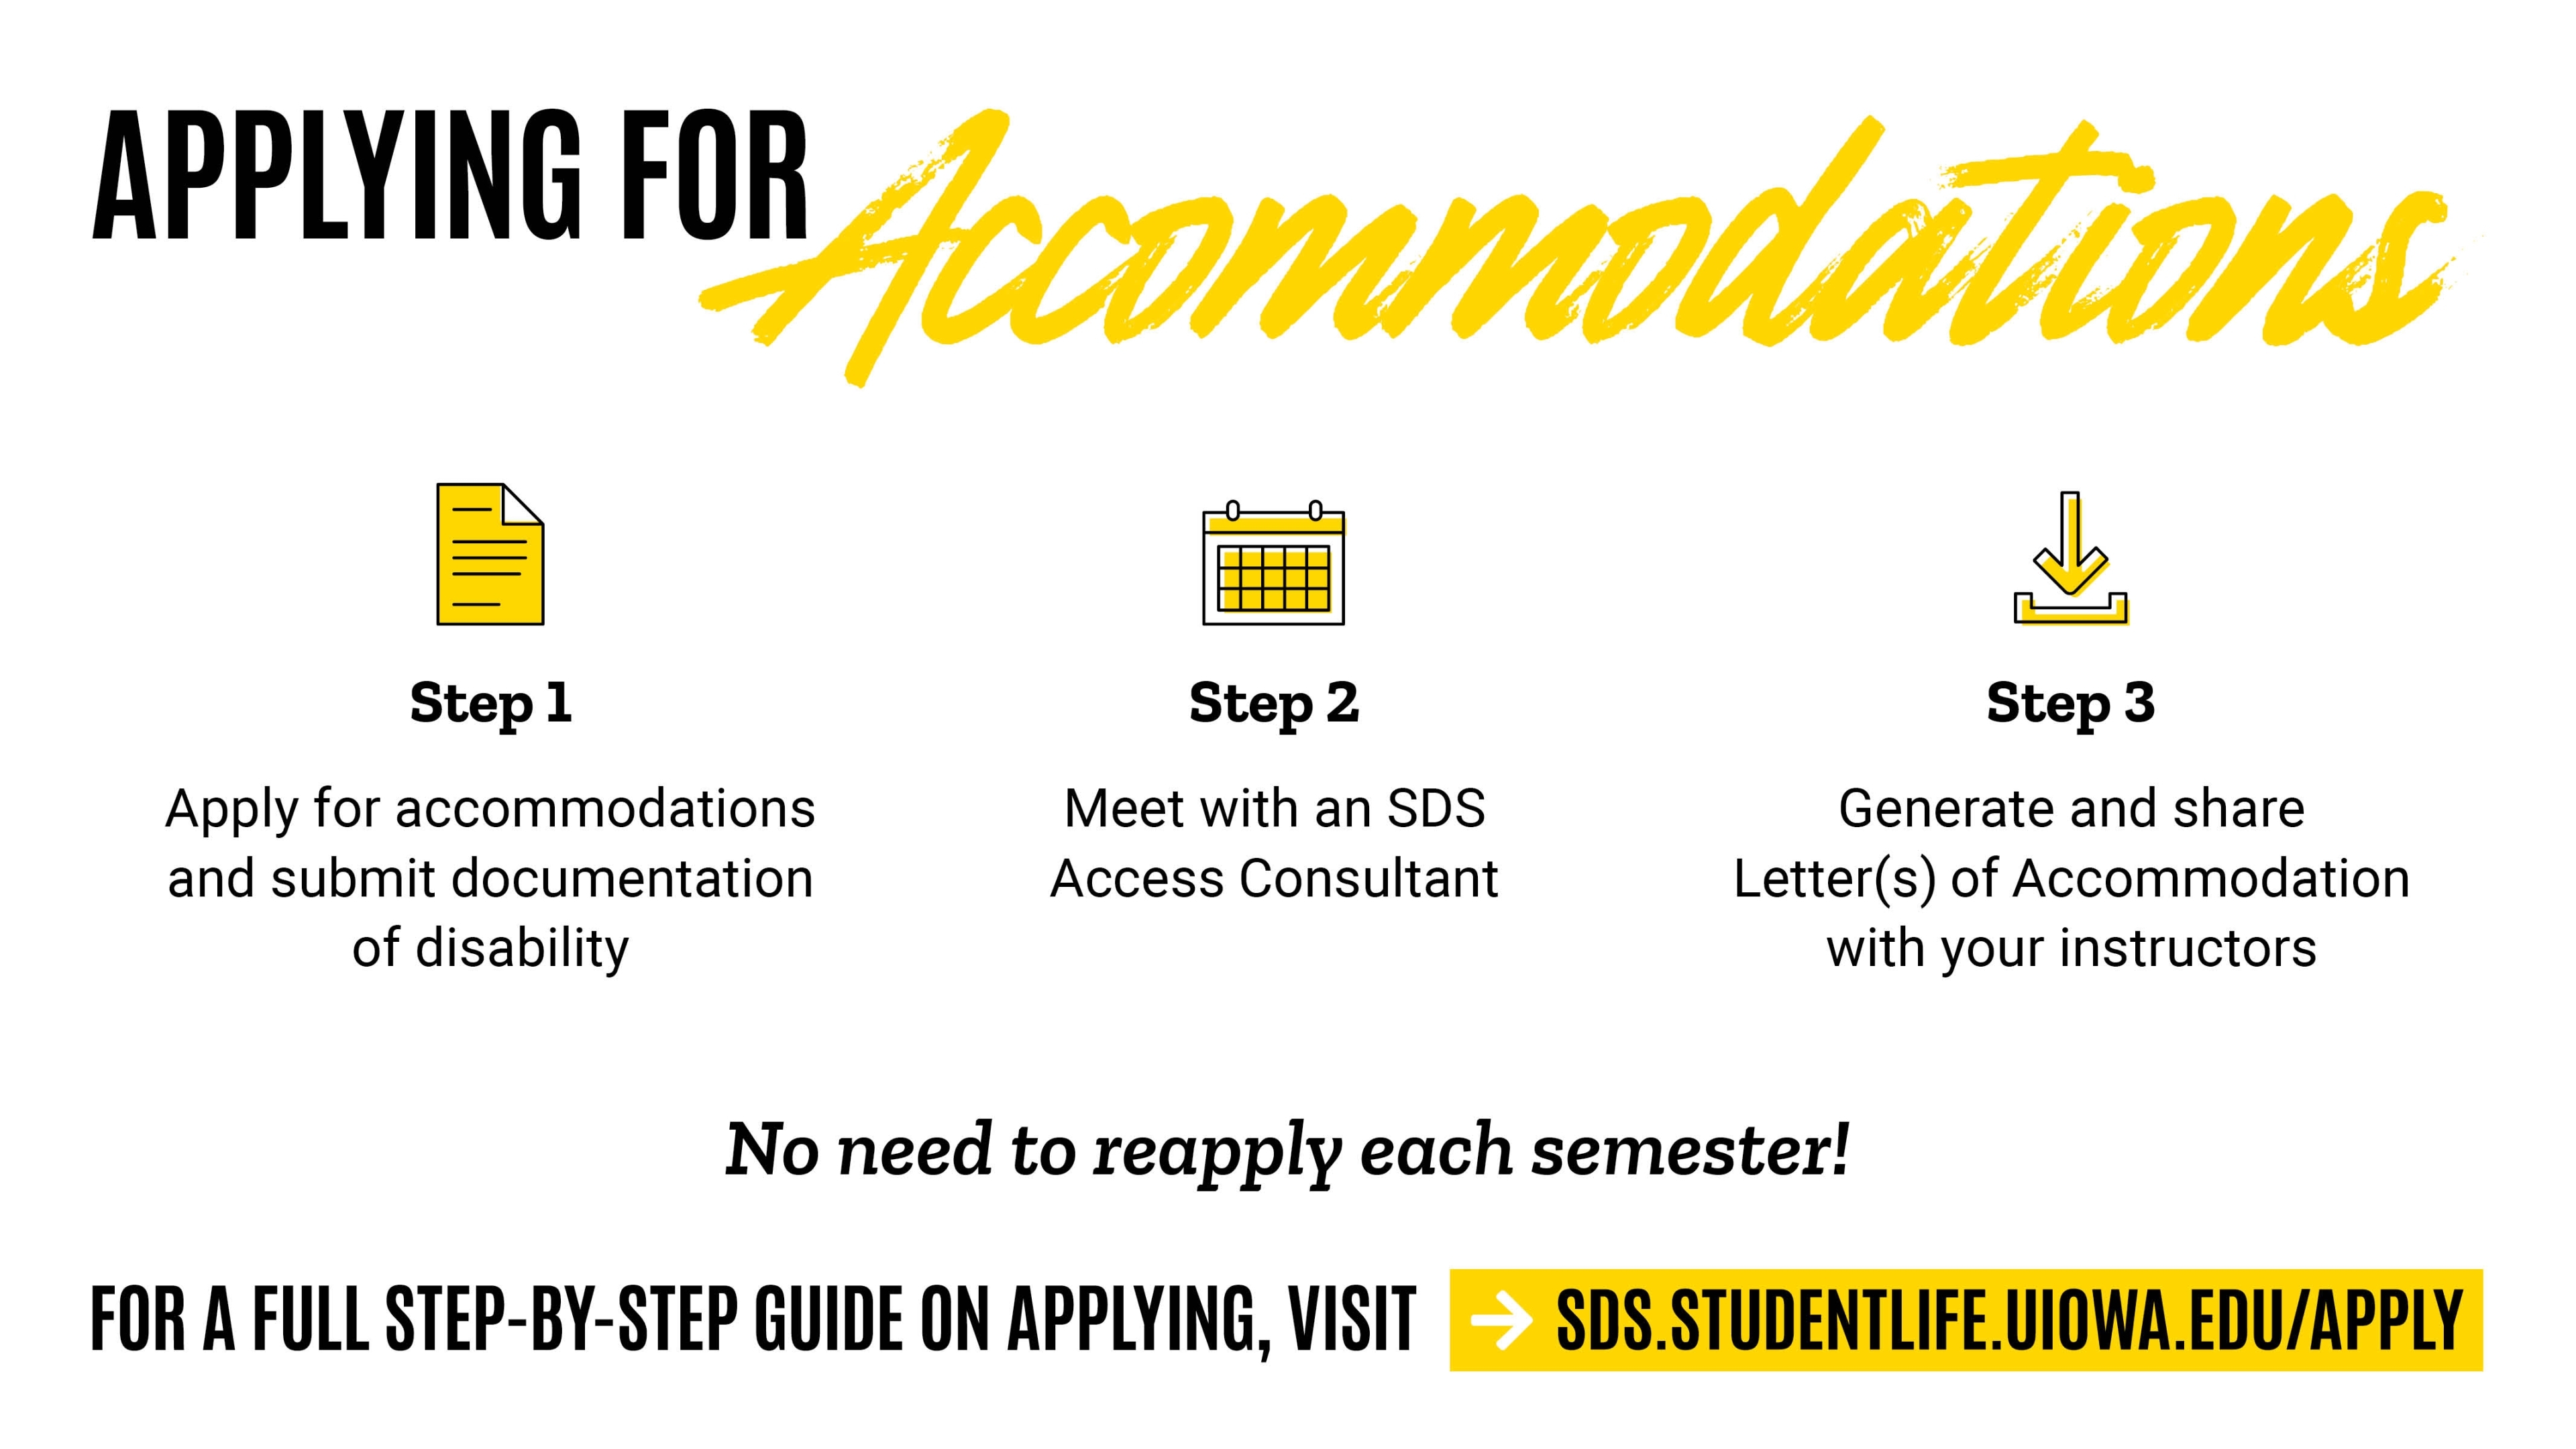 Apply for Accommodations Process: step 1 apply for accommodations and submit documentation of disability, Step 2 meet with an sds access consultant, step 3 generate and share Letter(s) of Accommodation with your instructors. No need to reapply each semester! 